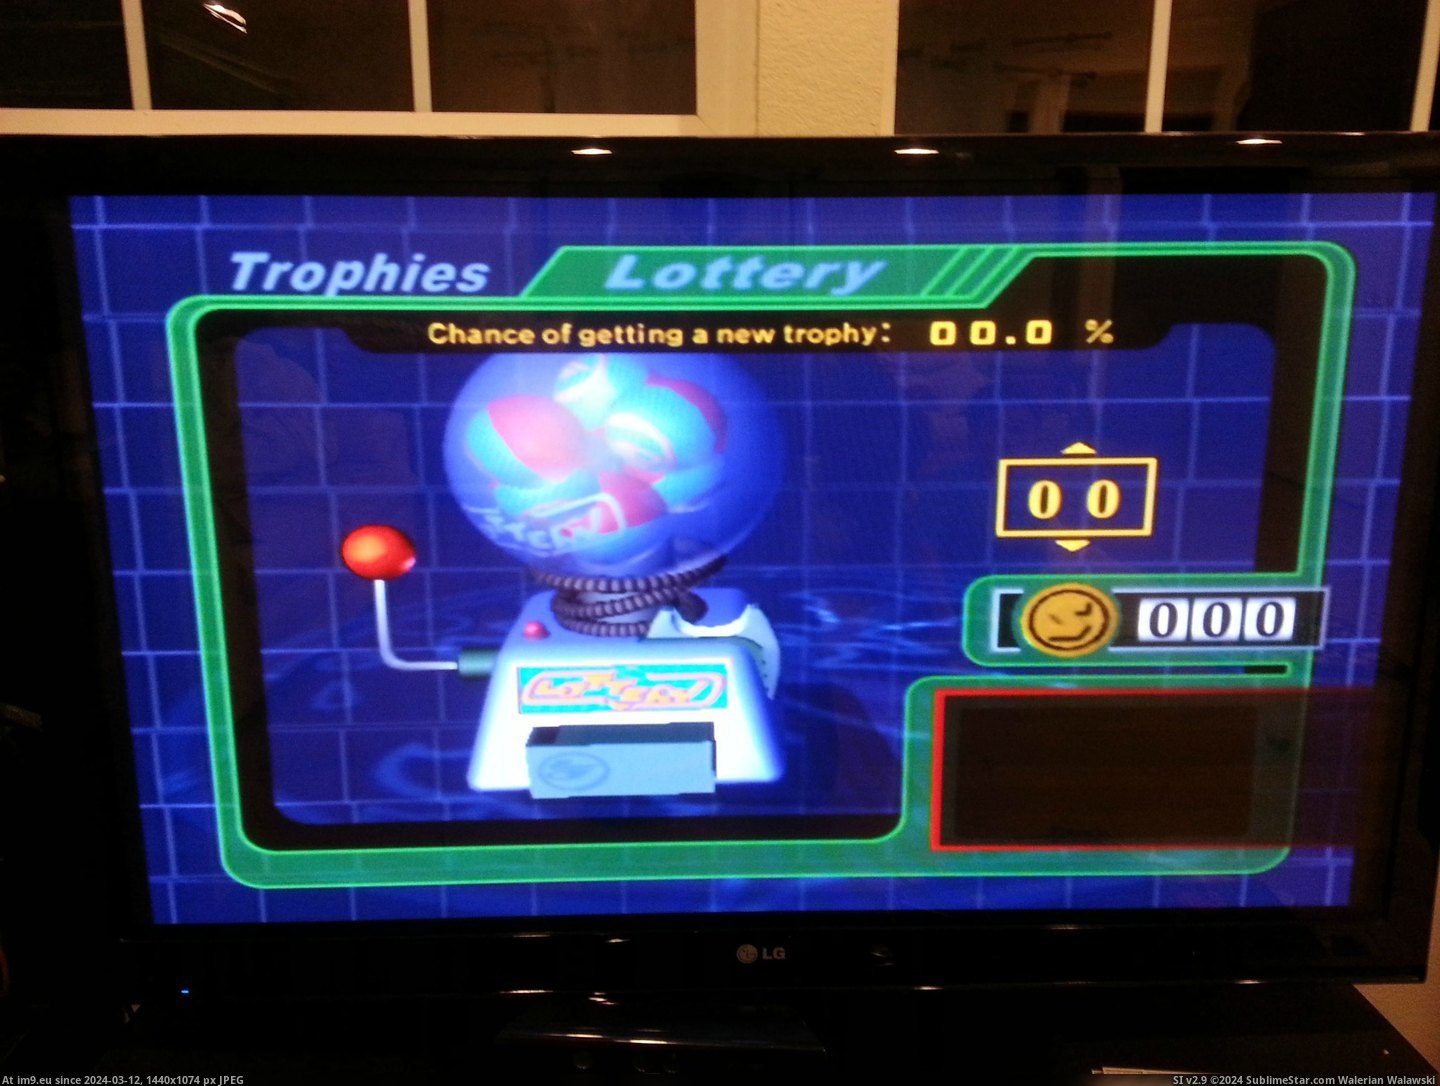 #Gaming #Years #Trophy #Ssbm #Finally #Single [Gaming] After 12 years, I've finally gotten every single trophy in SSBM. 1 Pic. (Изображение из альбом My r/GAMING favs))